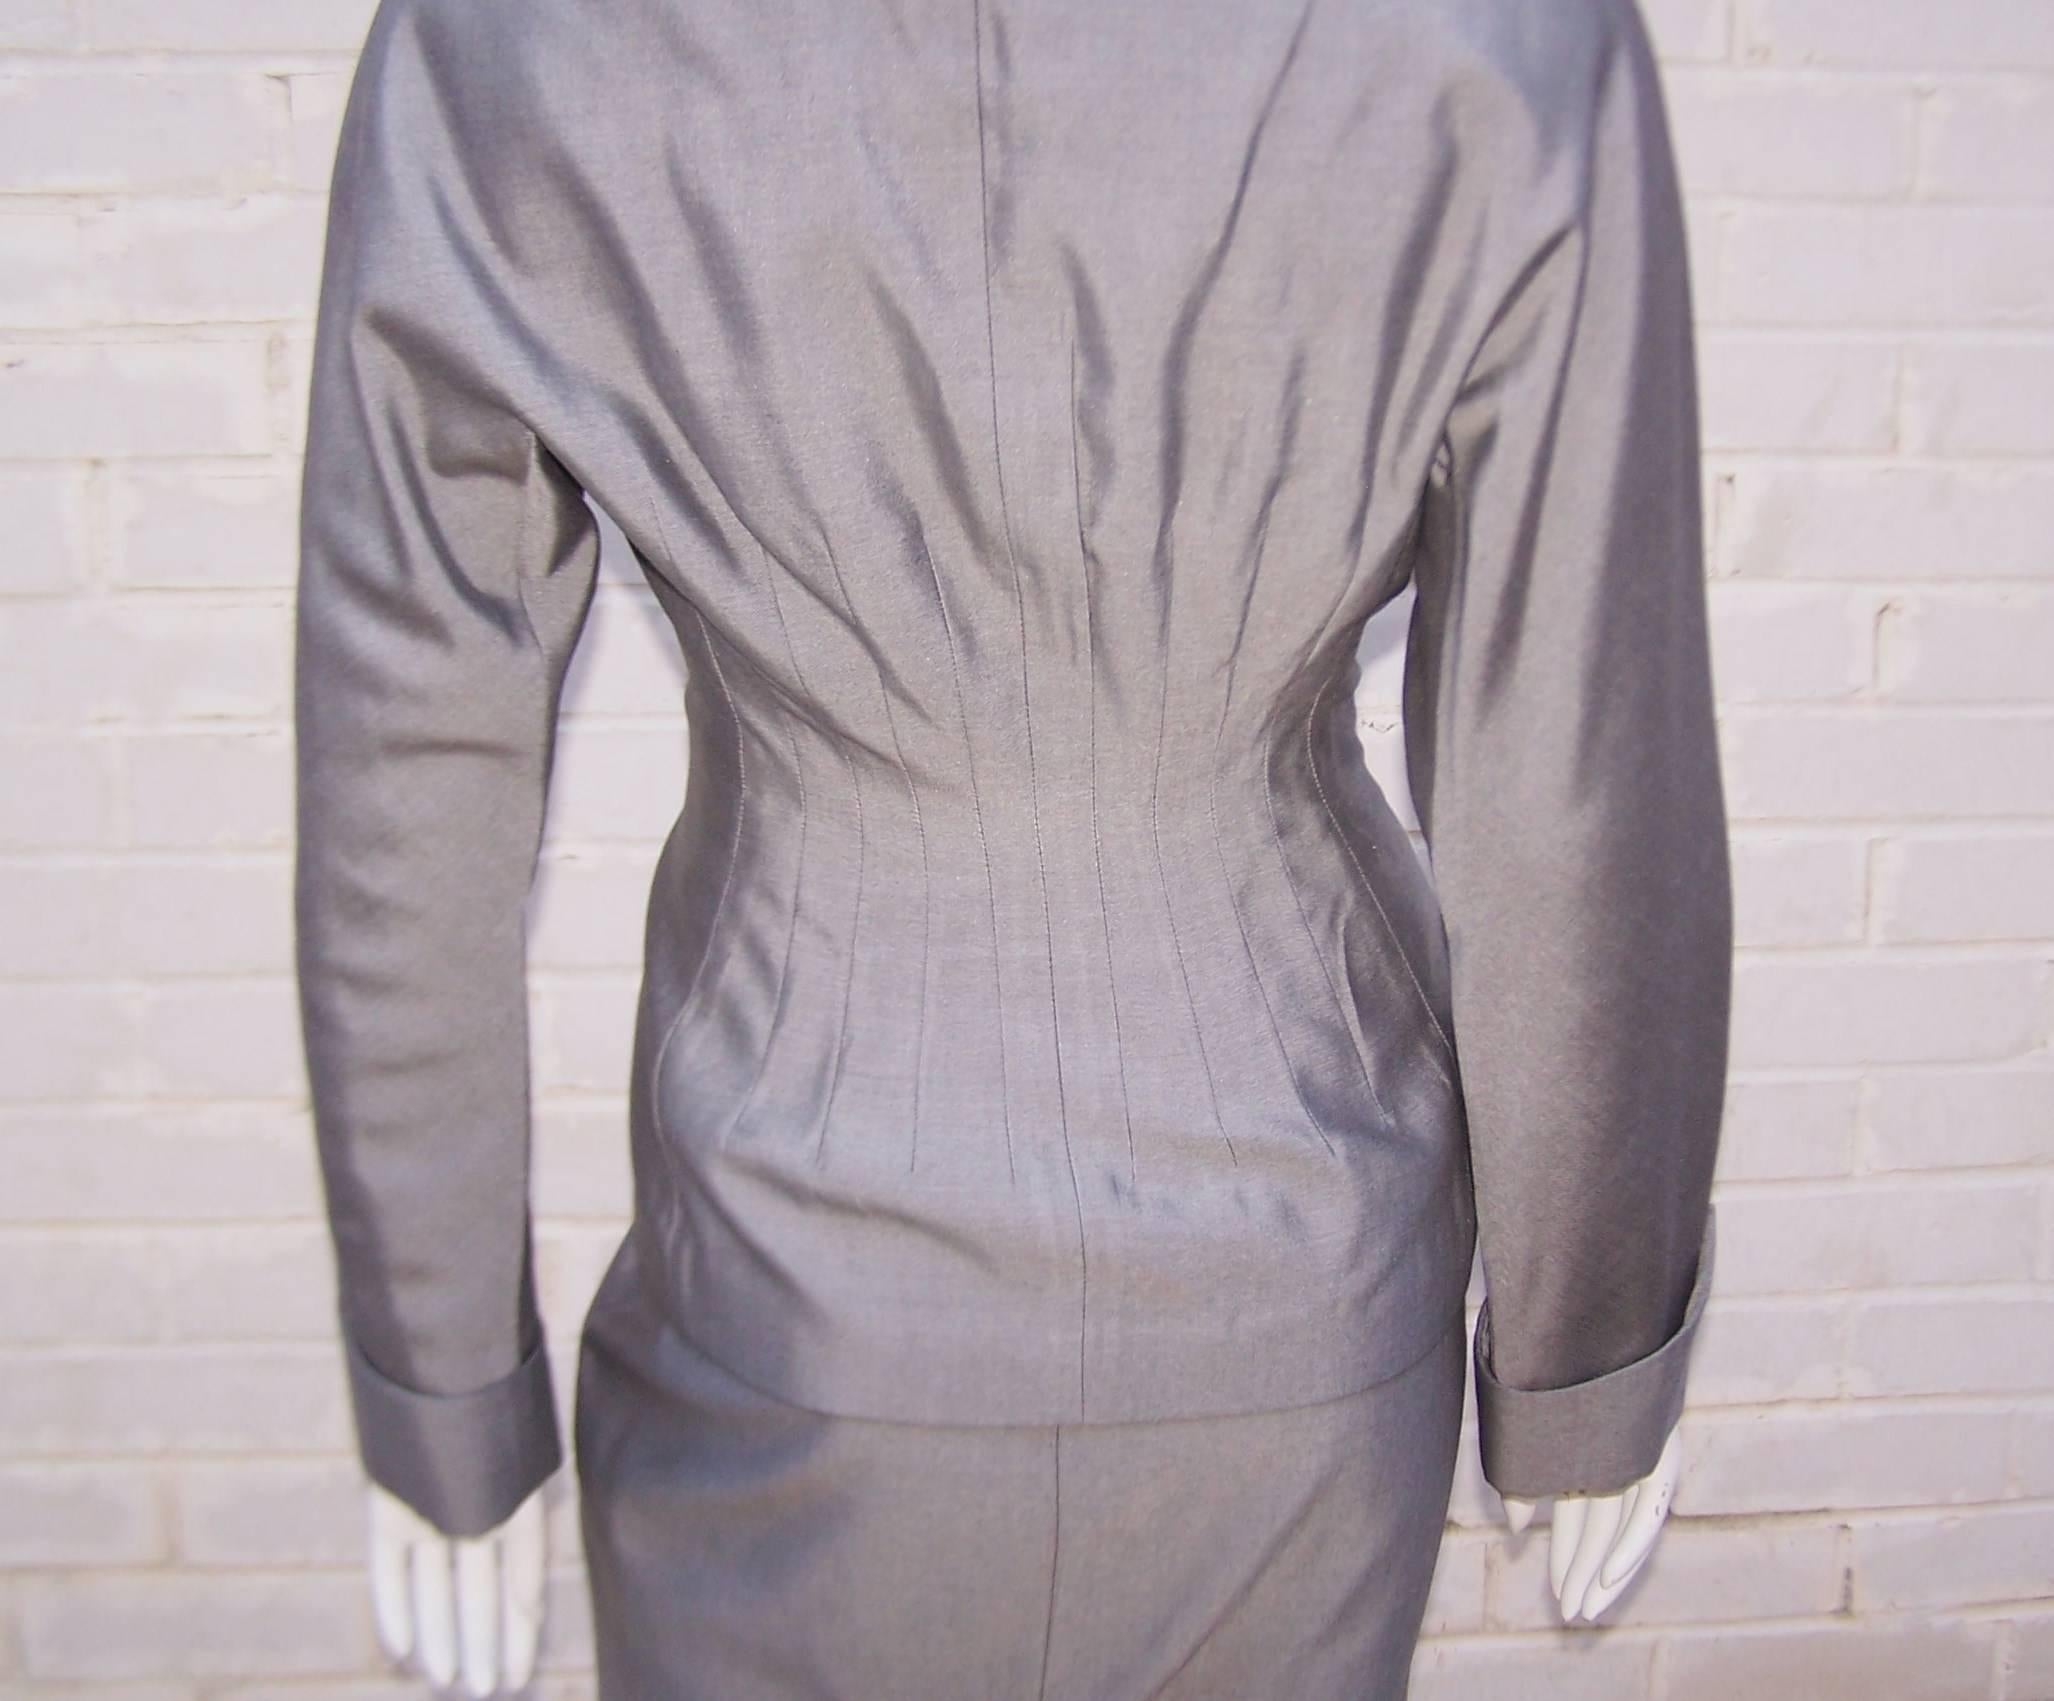 C.1980 Anne Klein Sharkskin Gray Skirt Suit With 1940's Inspiration 3